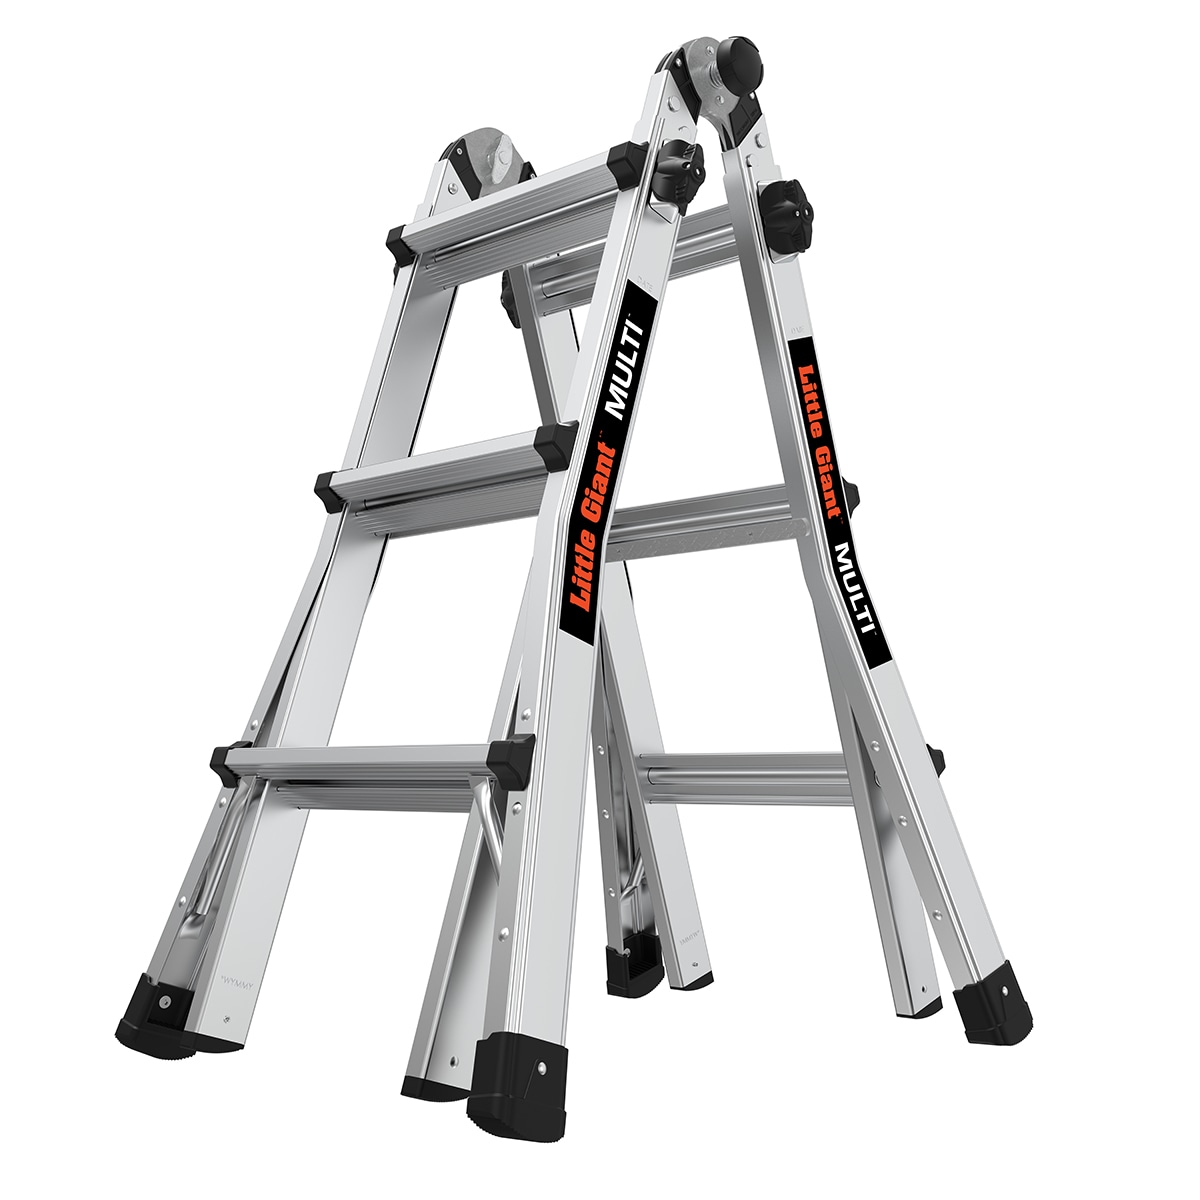 Attic Ease Ladders & Scaffolding at